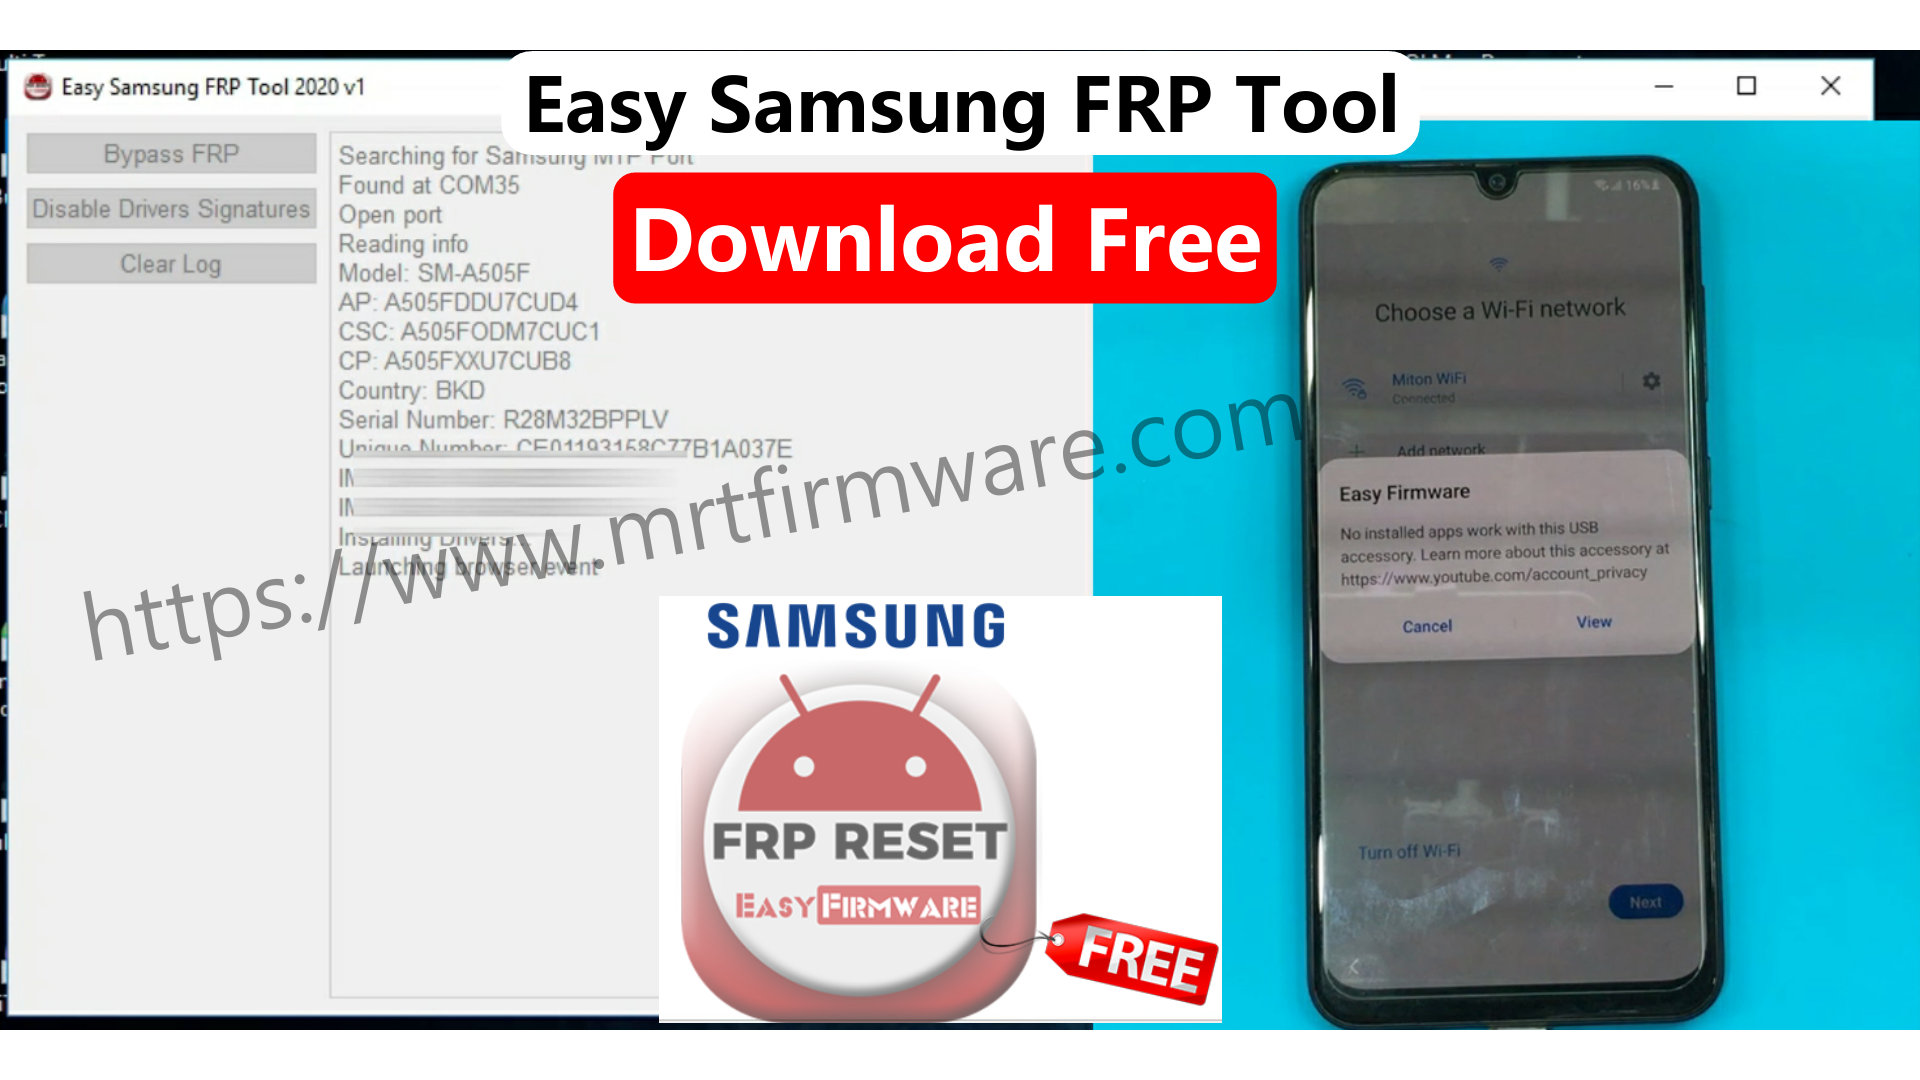 easy samsung frp tool 2021 free download